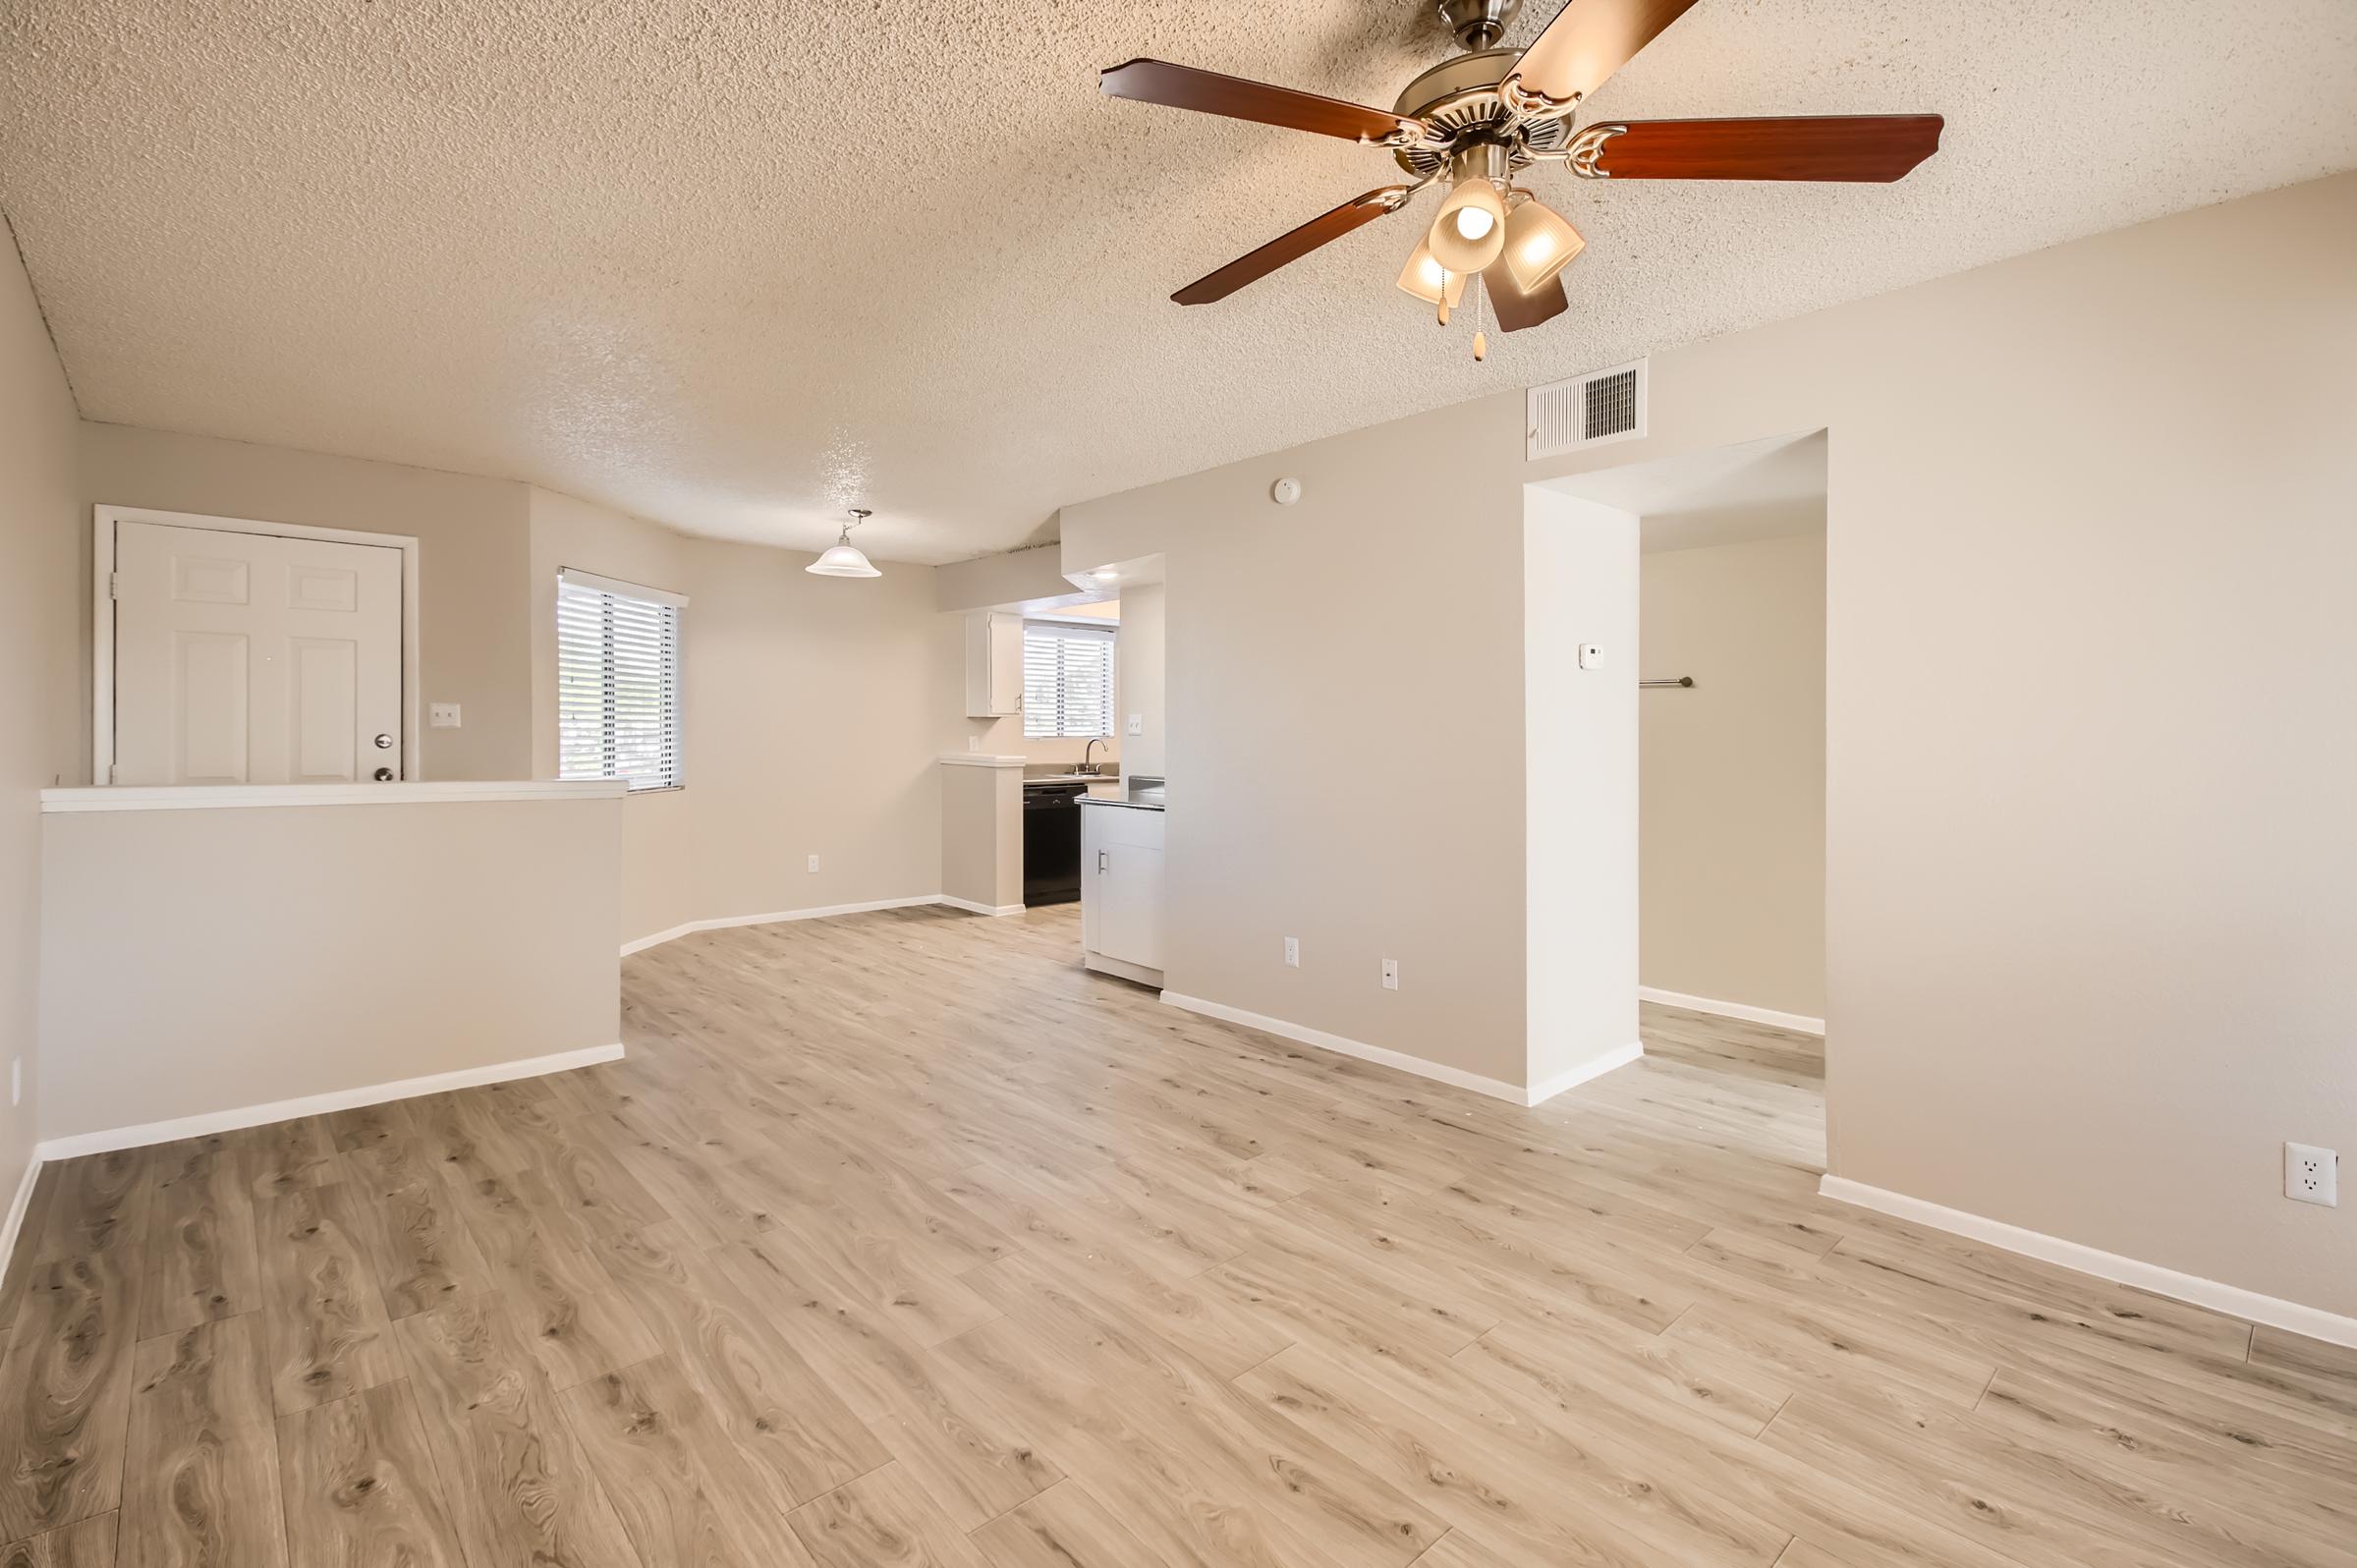 Rise Desert Cove Phoenix, AZ apartment with an open floor plan with a ceiling fan and view of the kitchen